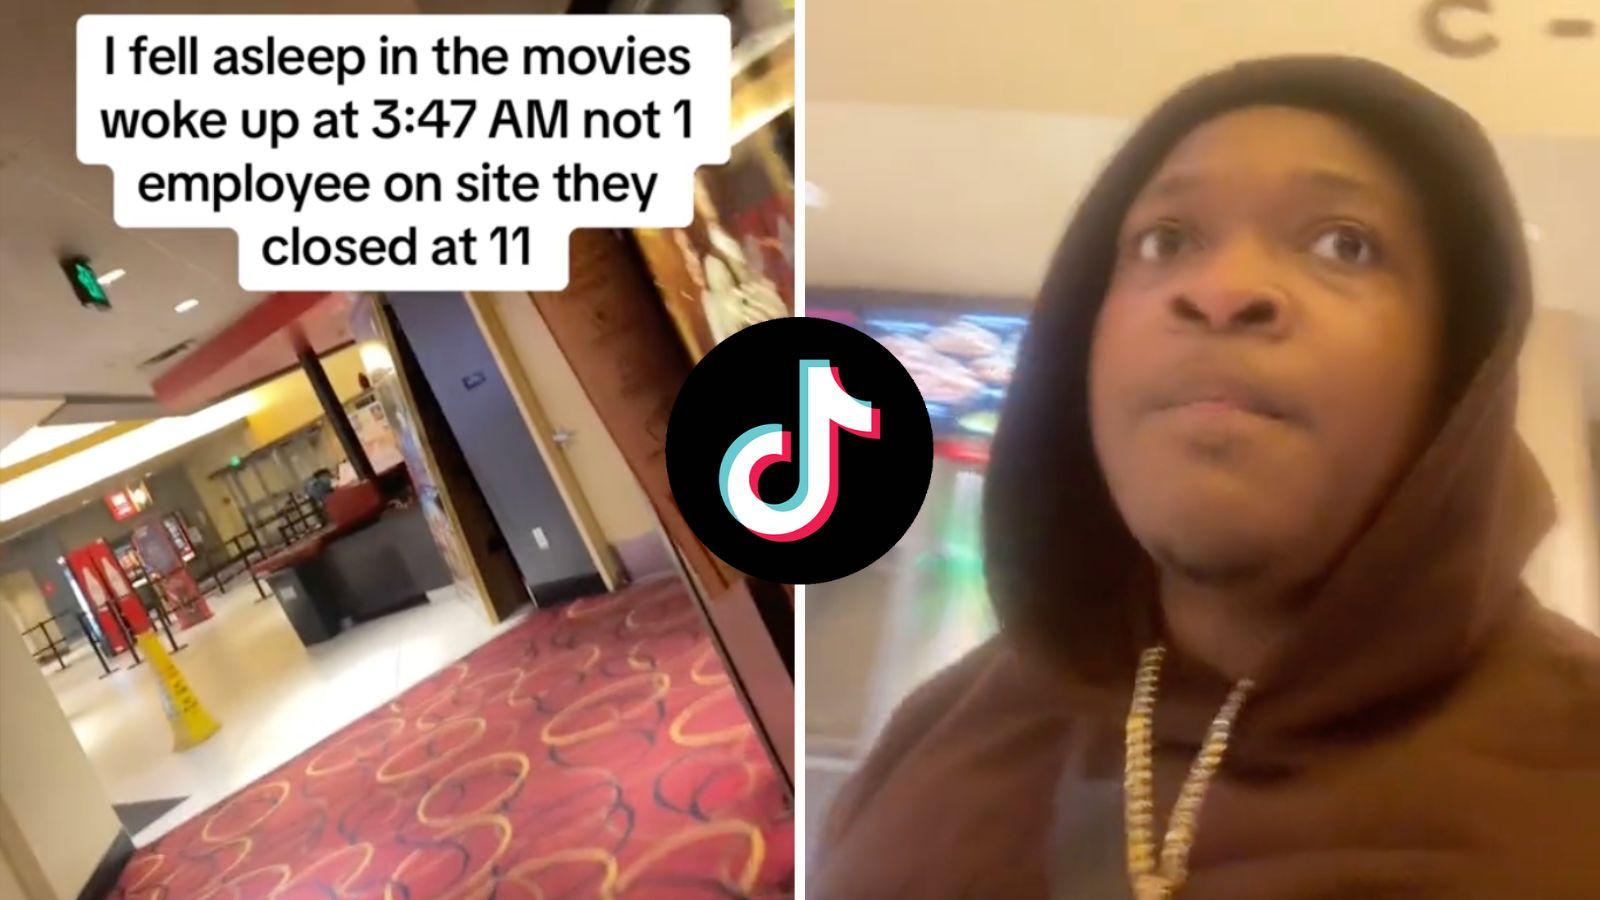 Man gets locked up in cinema after falling asleep during horror movie